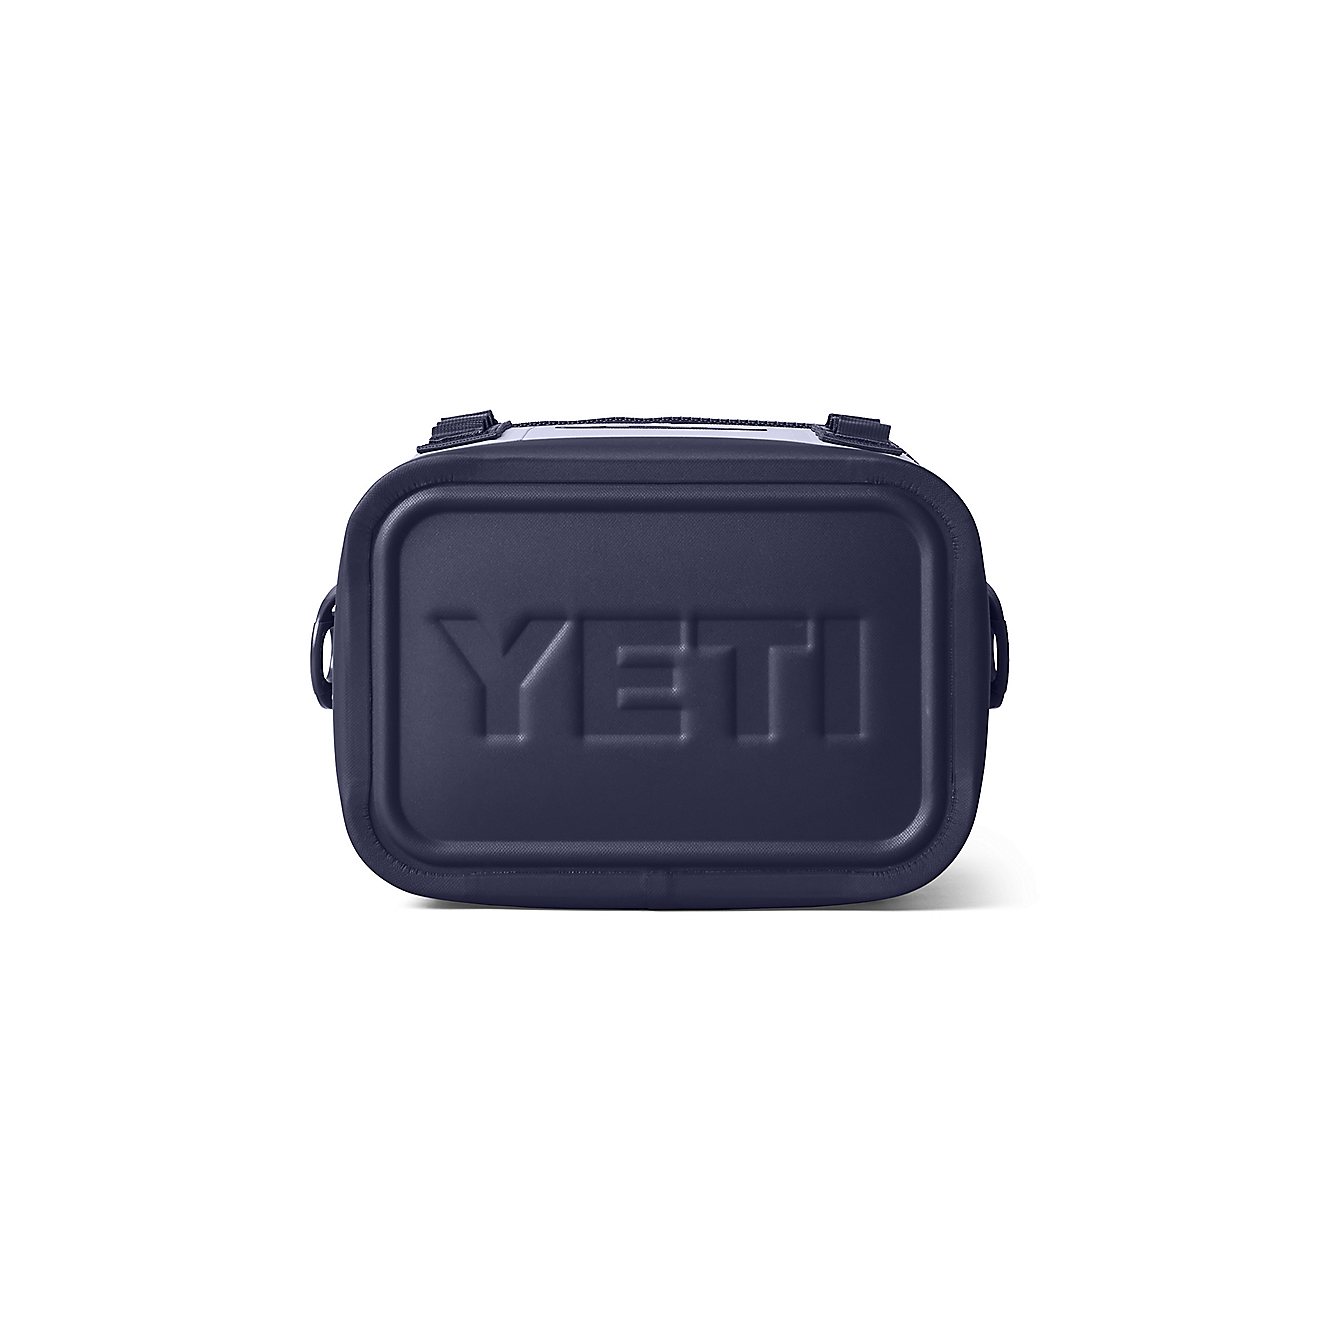 https://academy.scene7.com/is/image/academy//coolers/yeti-hopper-flip-8-soft-cooler-18060131200-purple/2e20e396bf834cb88a6f251f56553641?$pdp-mobile-gallery-ng$